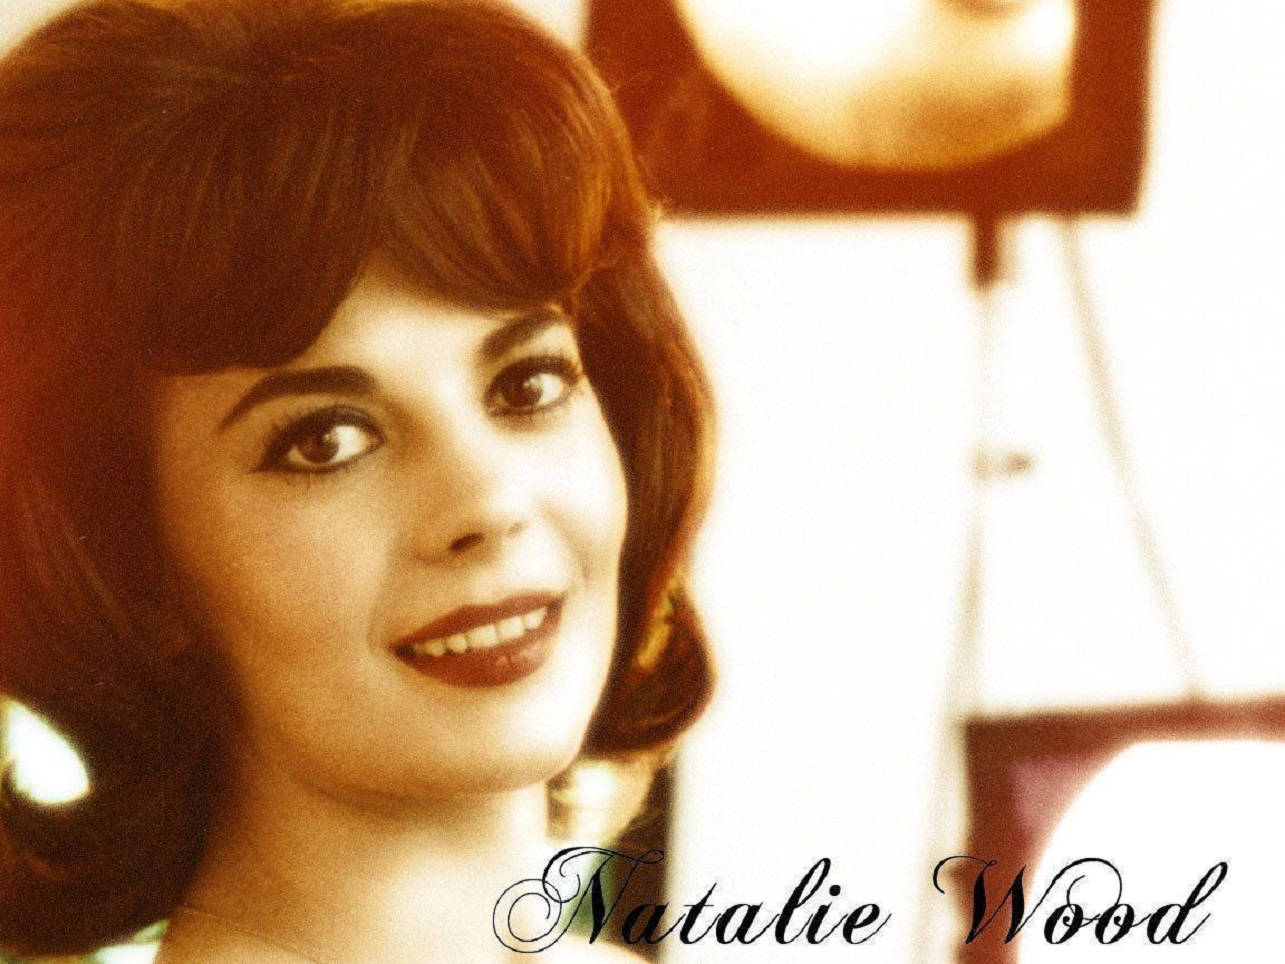 Hollywood Icon Natalie Wood Flaunting a 1960s Hairstyle Wallpaper